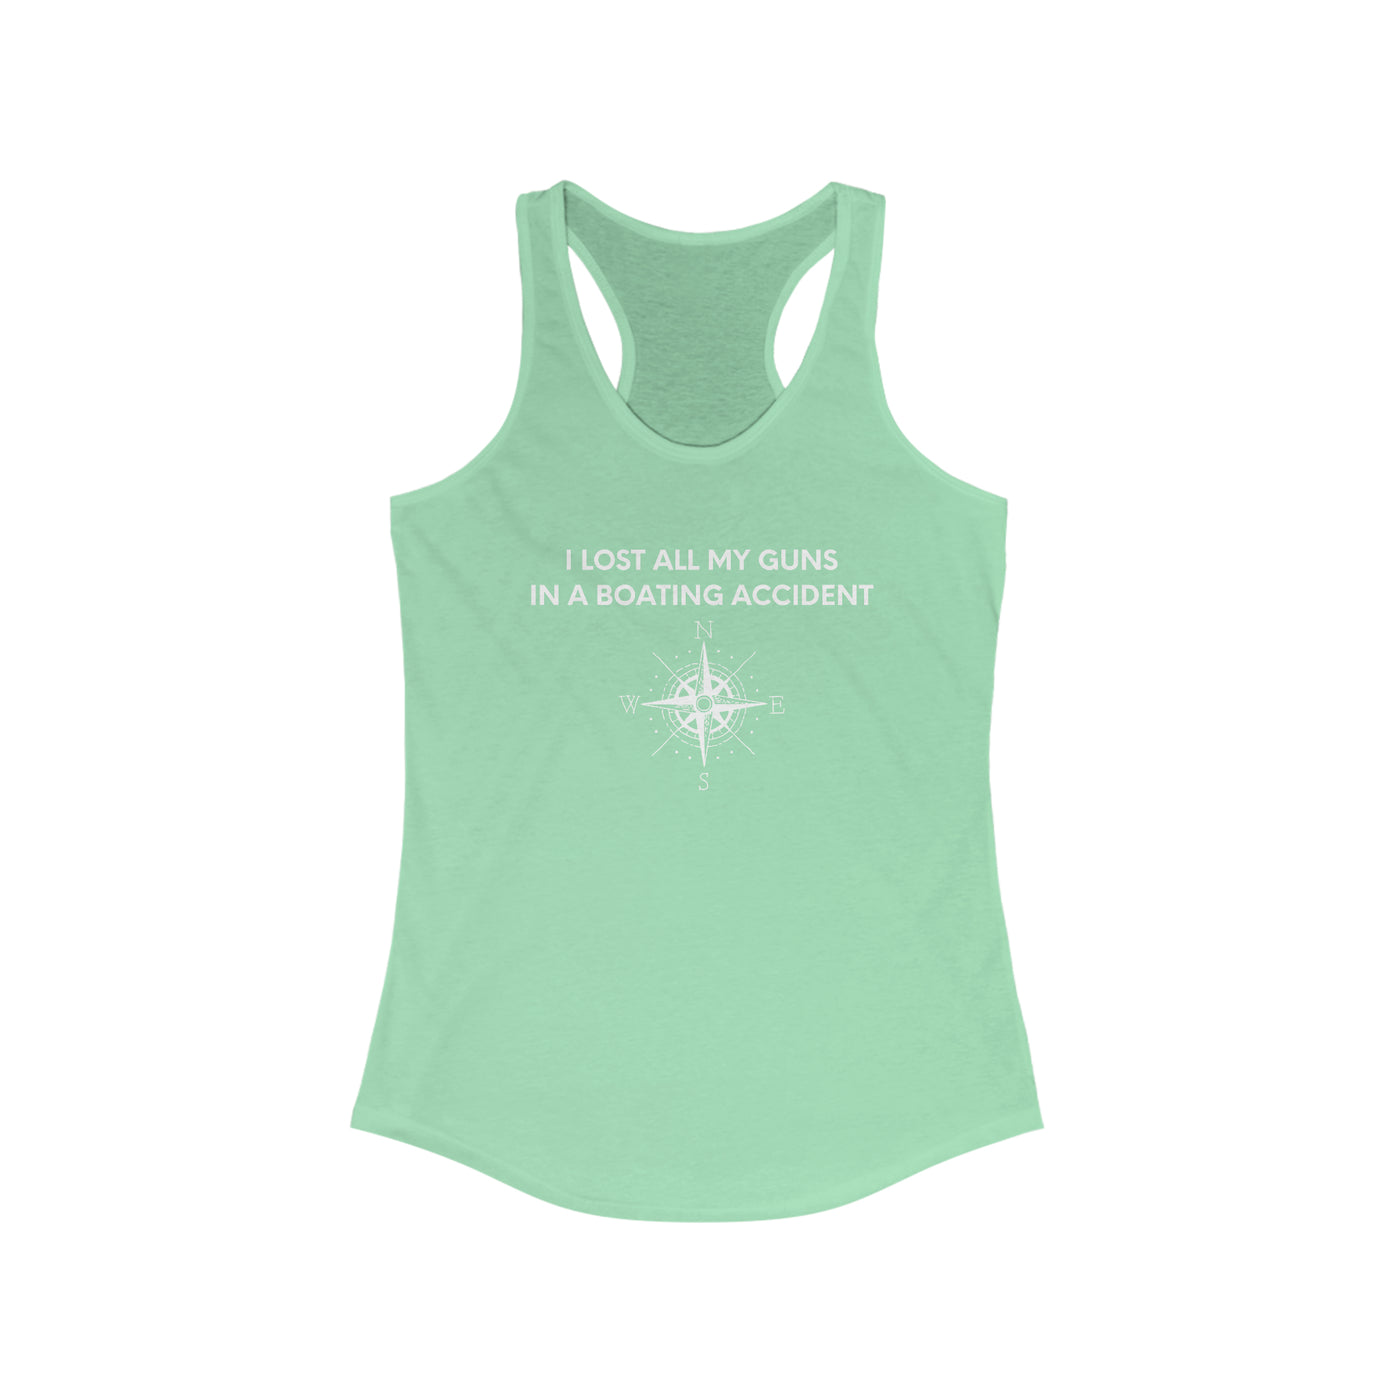 I Lost All My Guns In A Boating Accident Women's Racerback Tank